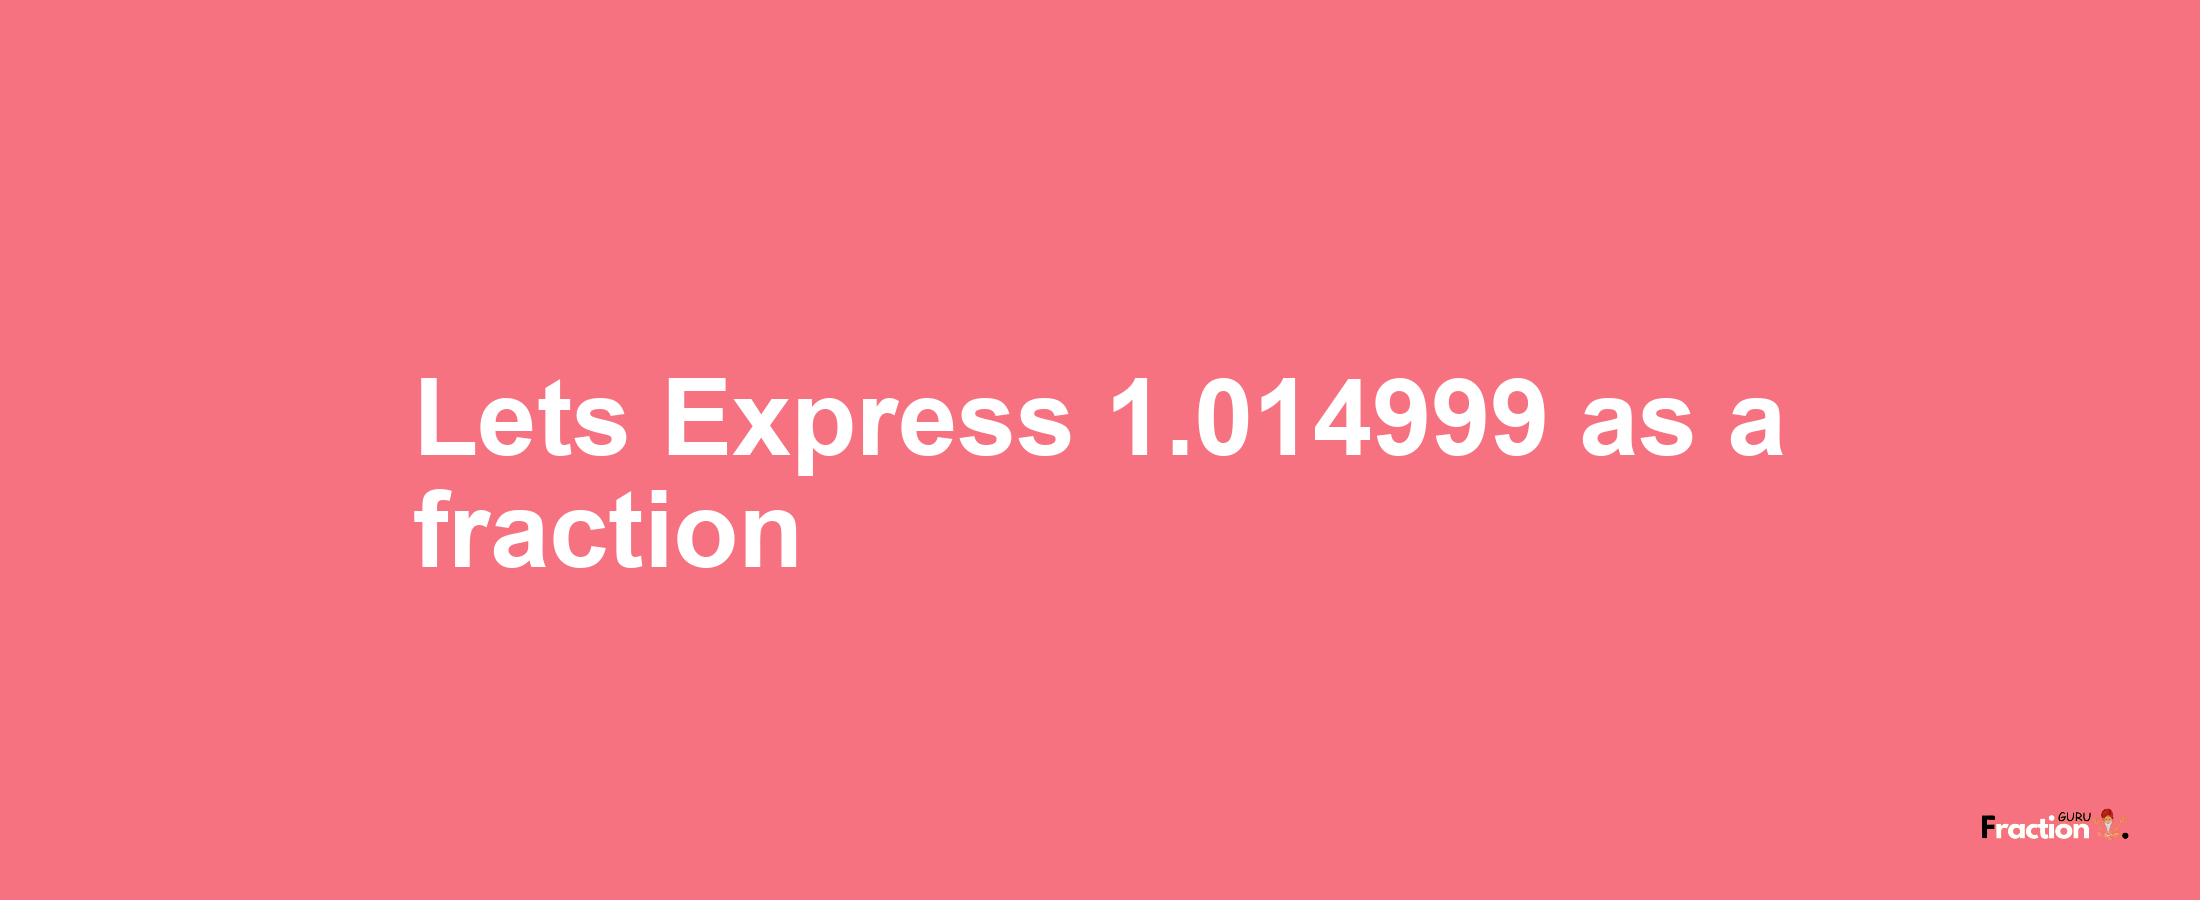 Lets Express 1.014999 as afraction